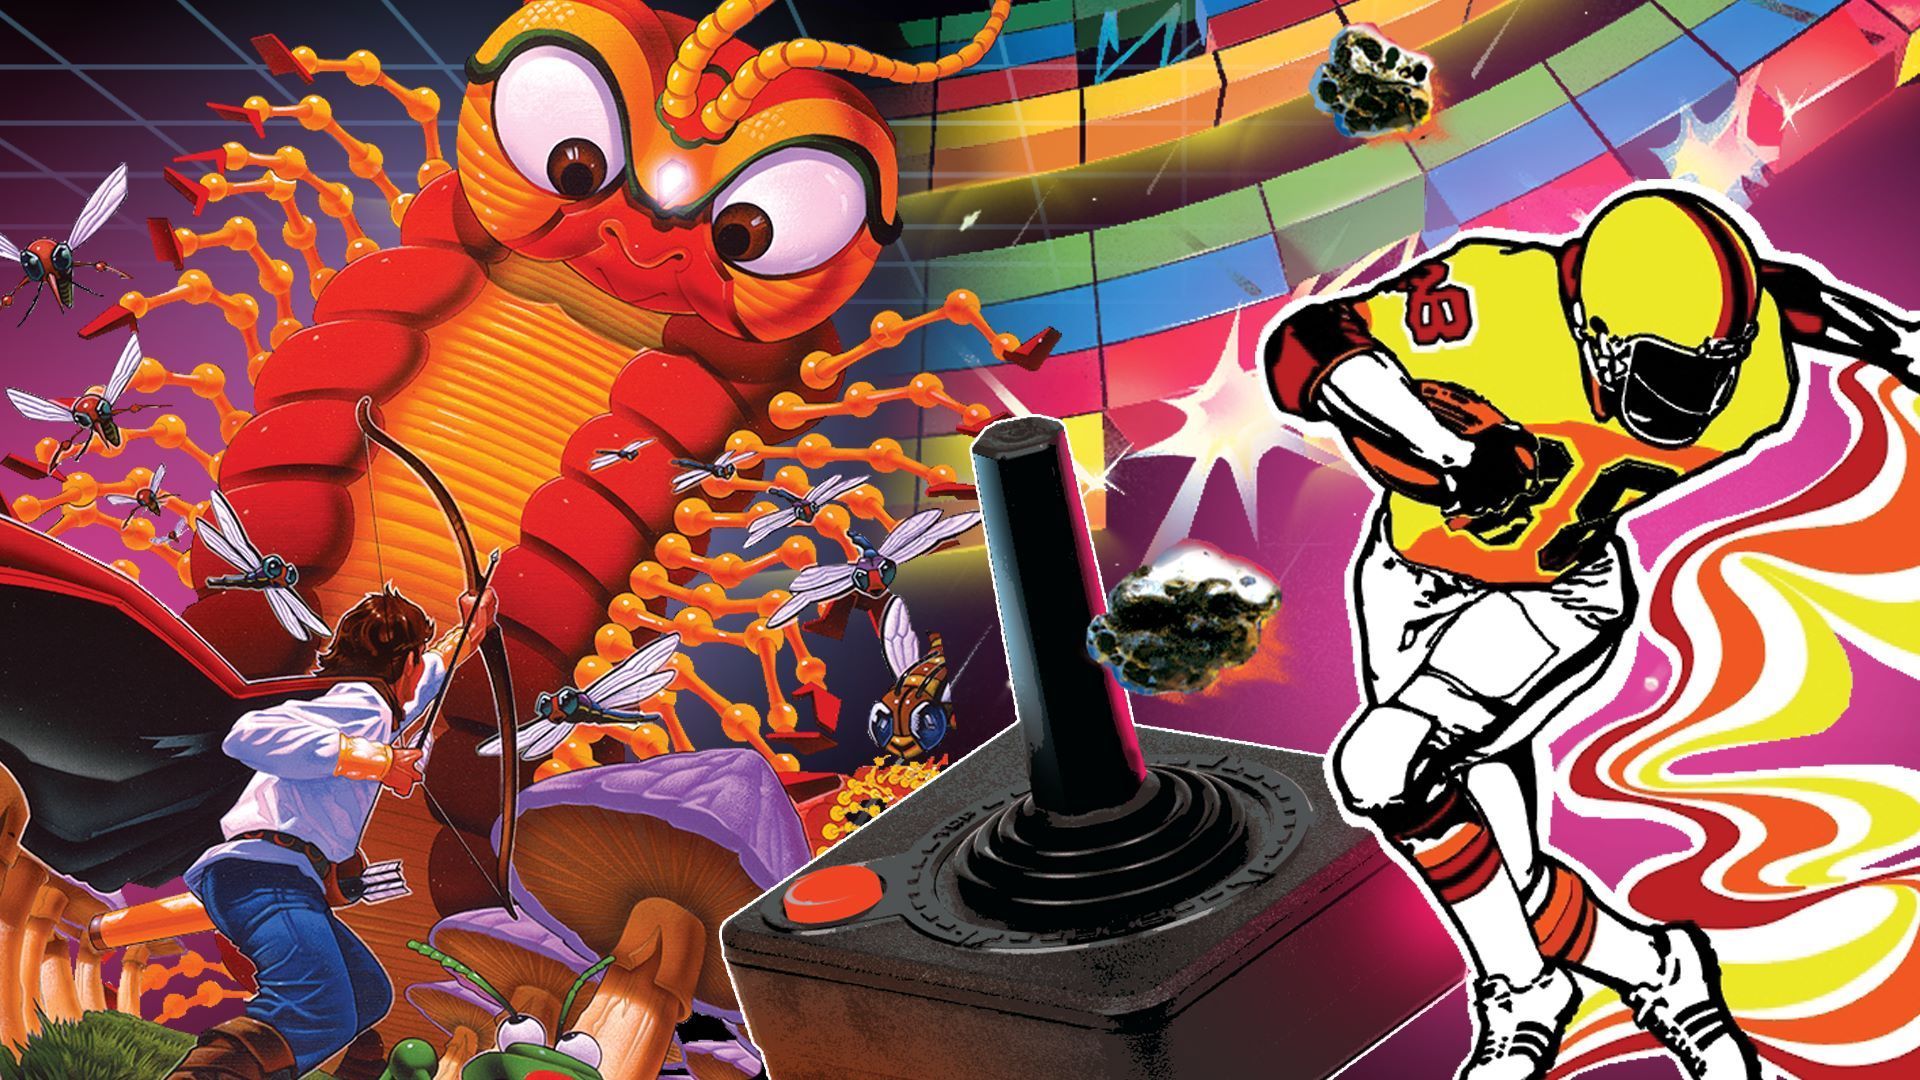 Volume 3 of the Atari Flashback Classics series now available on Xbox One